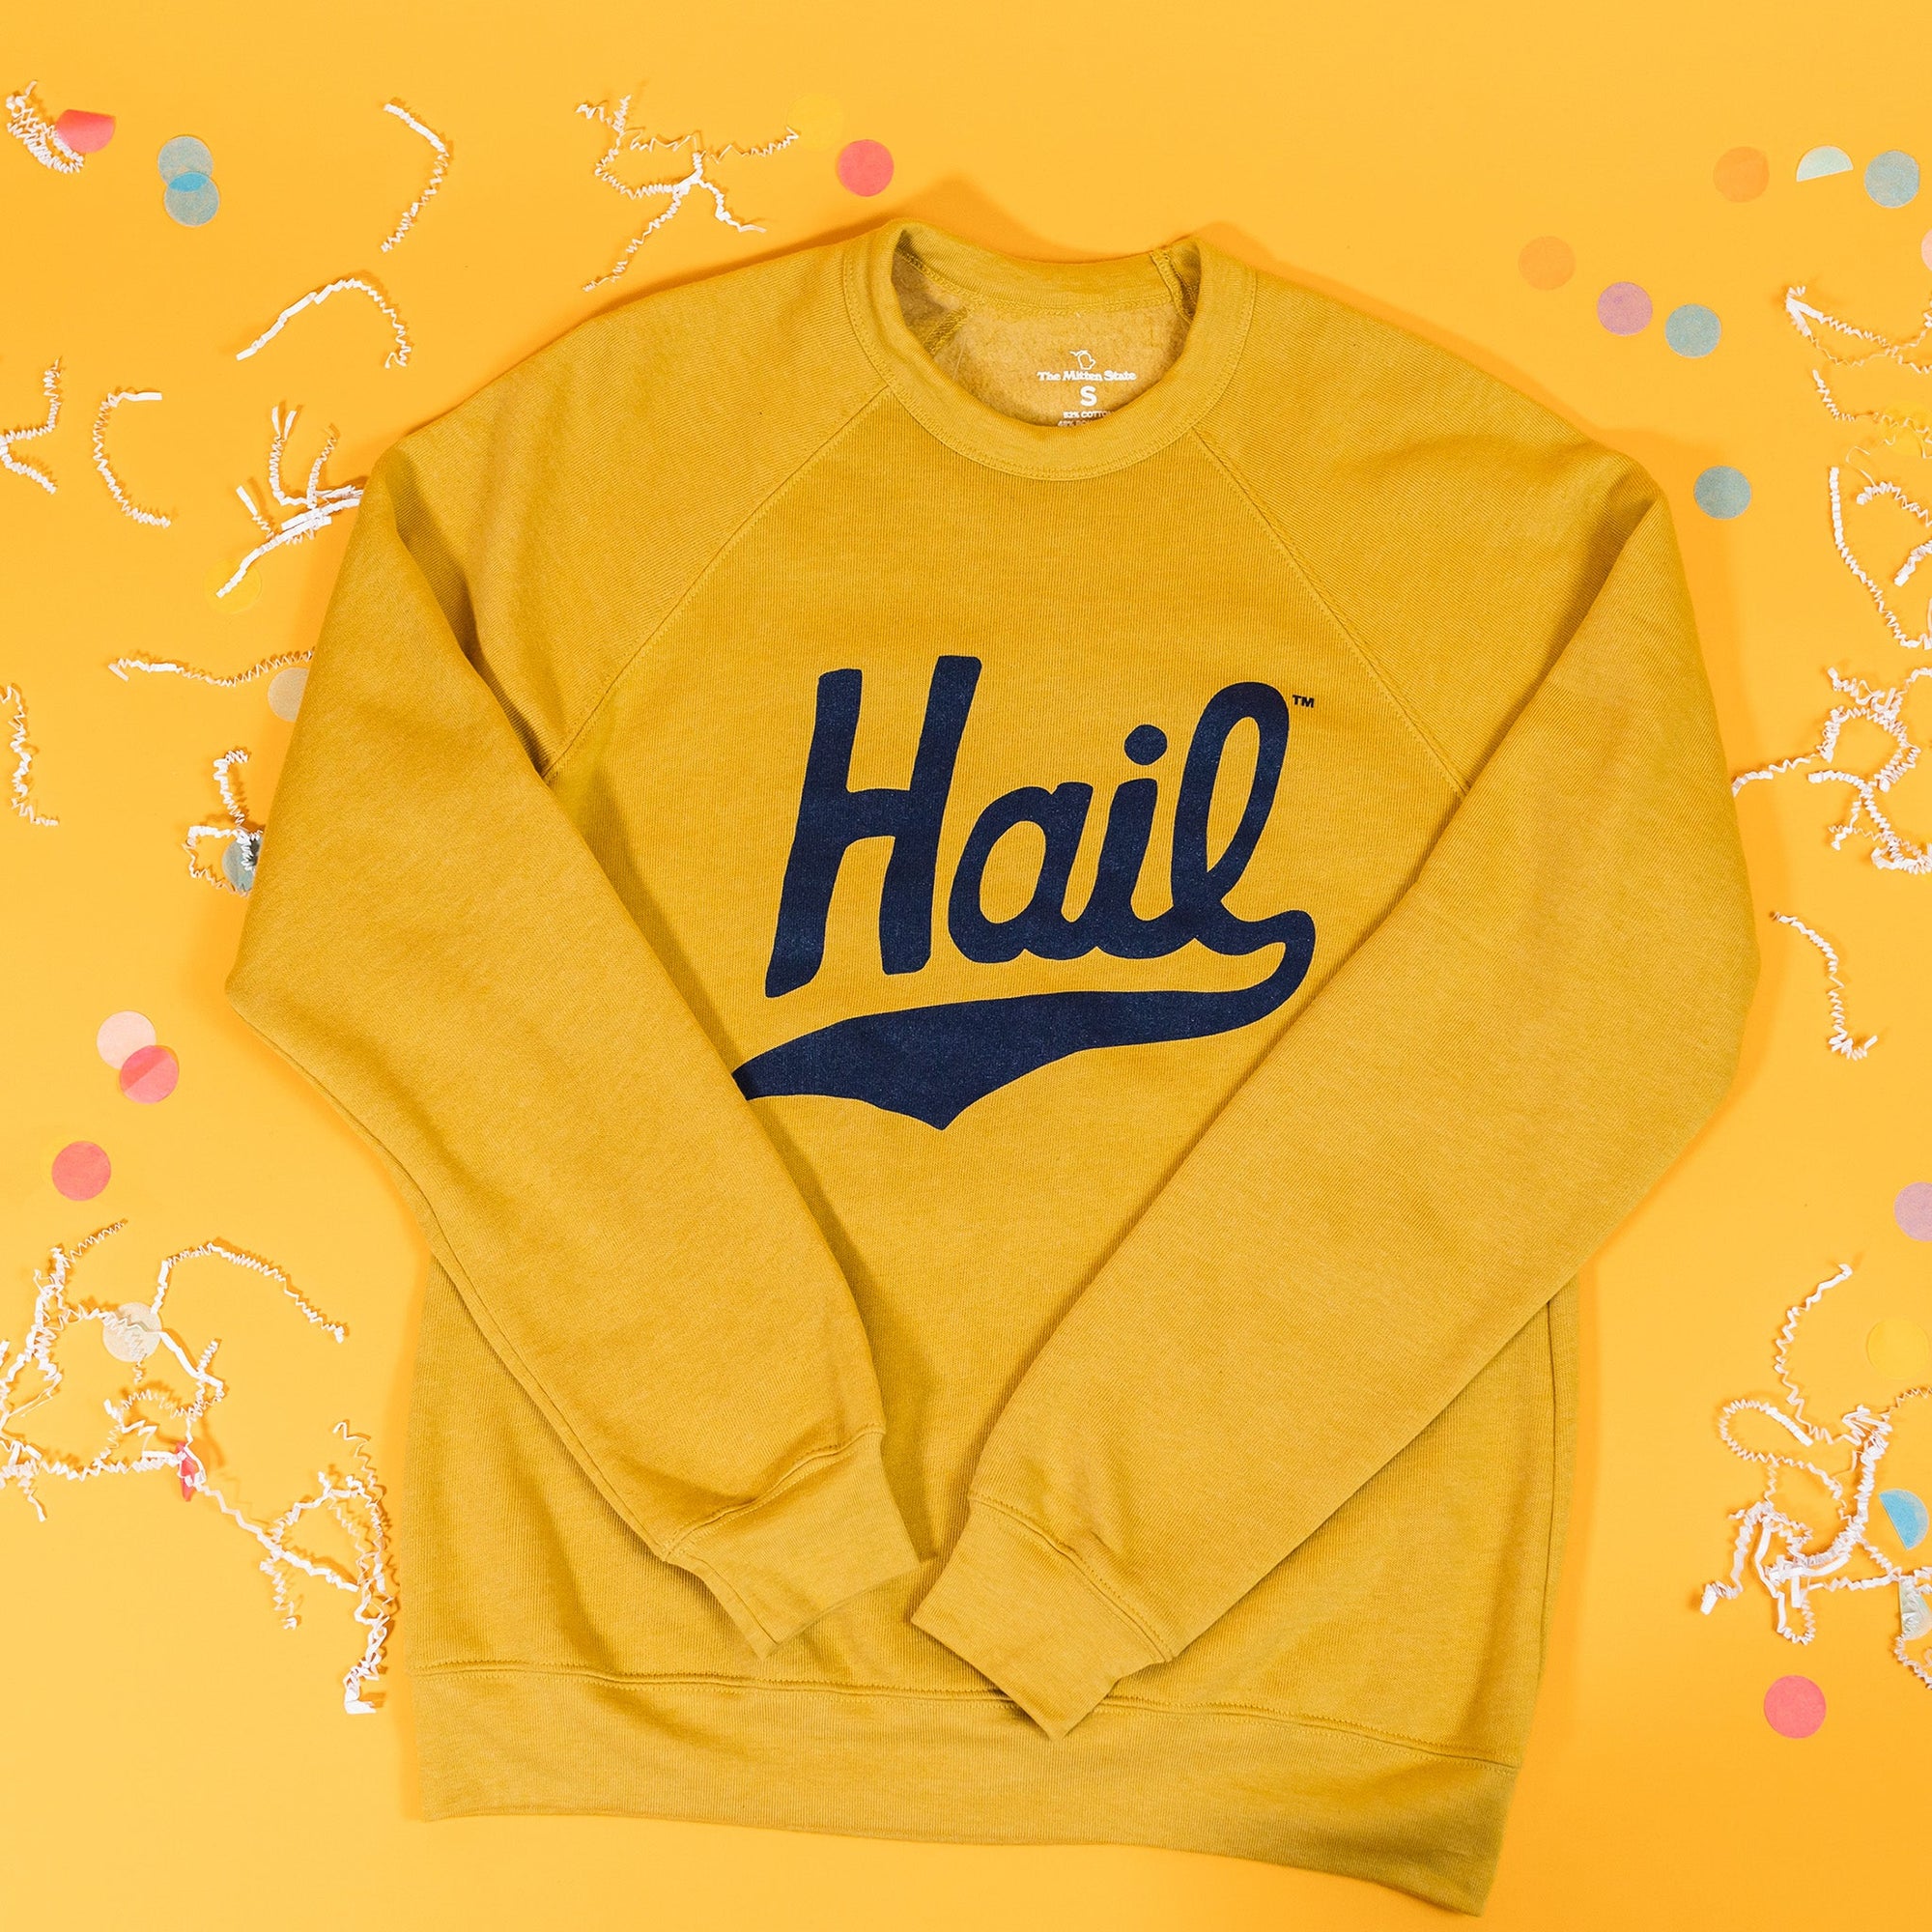 On a sunny mustard background sits a sweatshirt with white crinkle and big, colorful confetti scattered around. This mustard crewneck sweatshirt features a vintage, hand lettered "Hail" in navy.